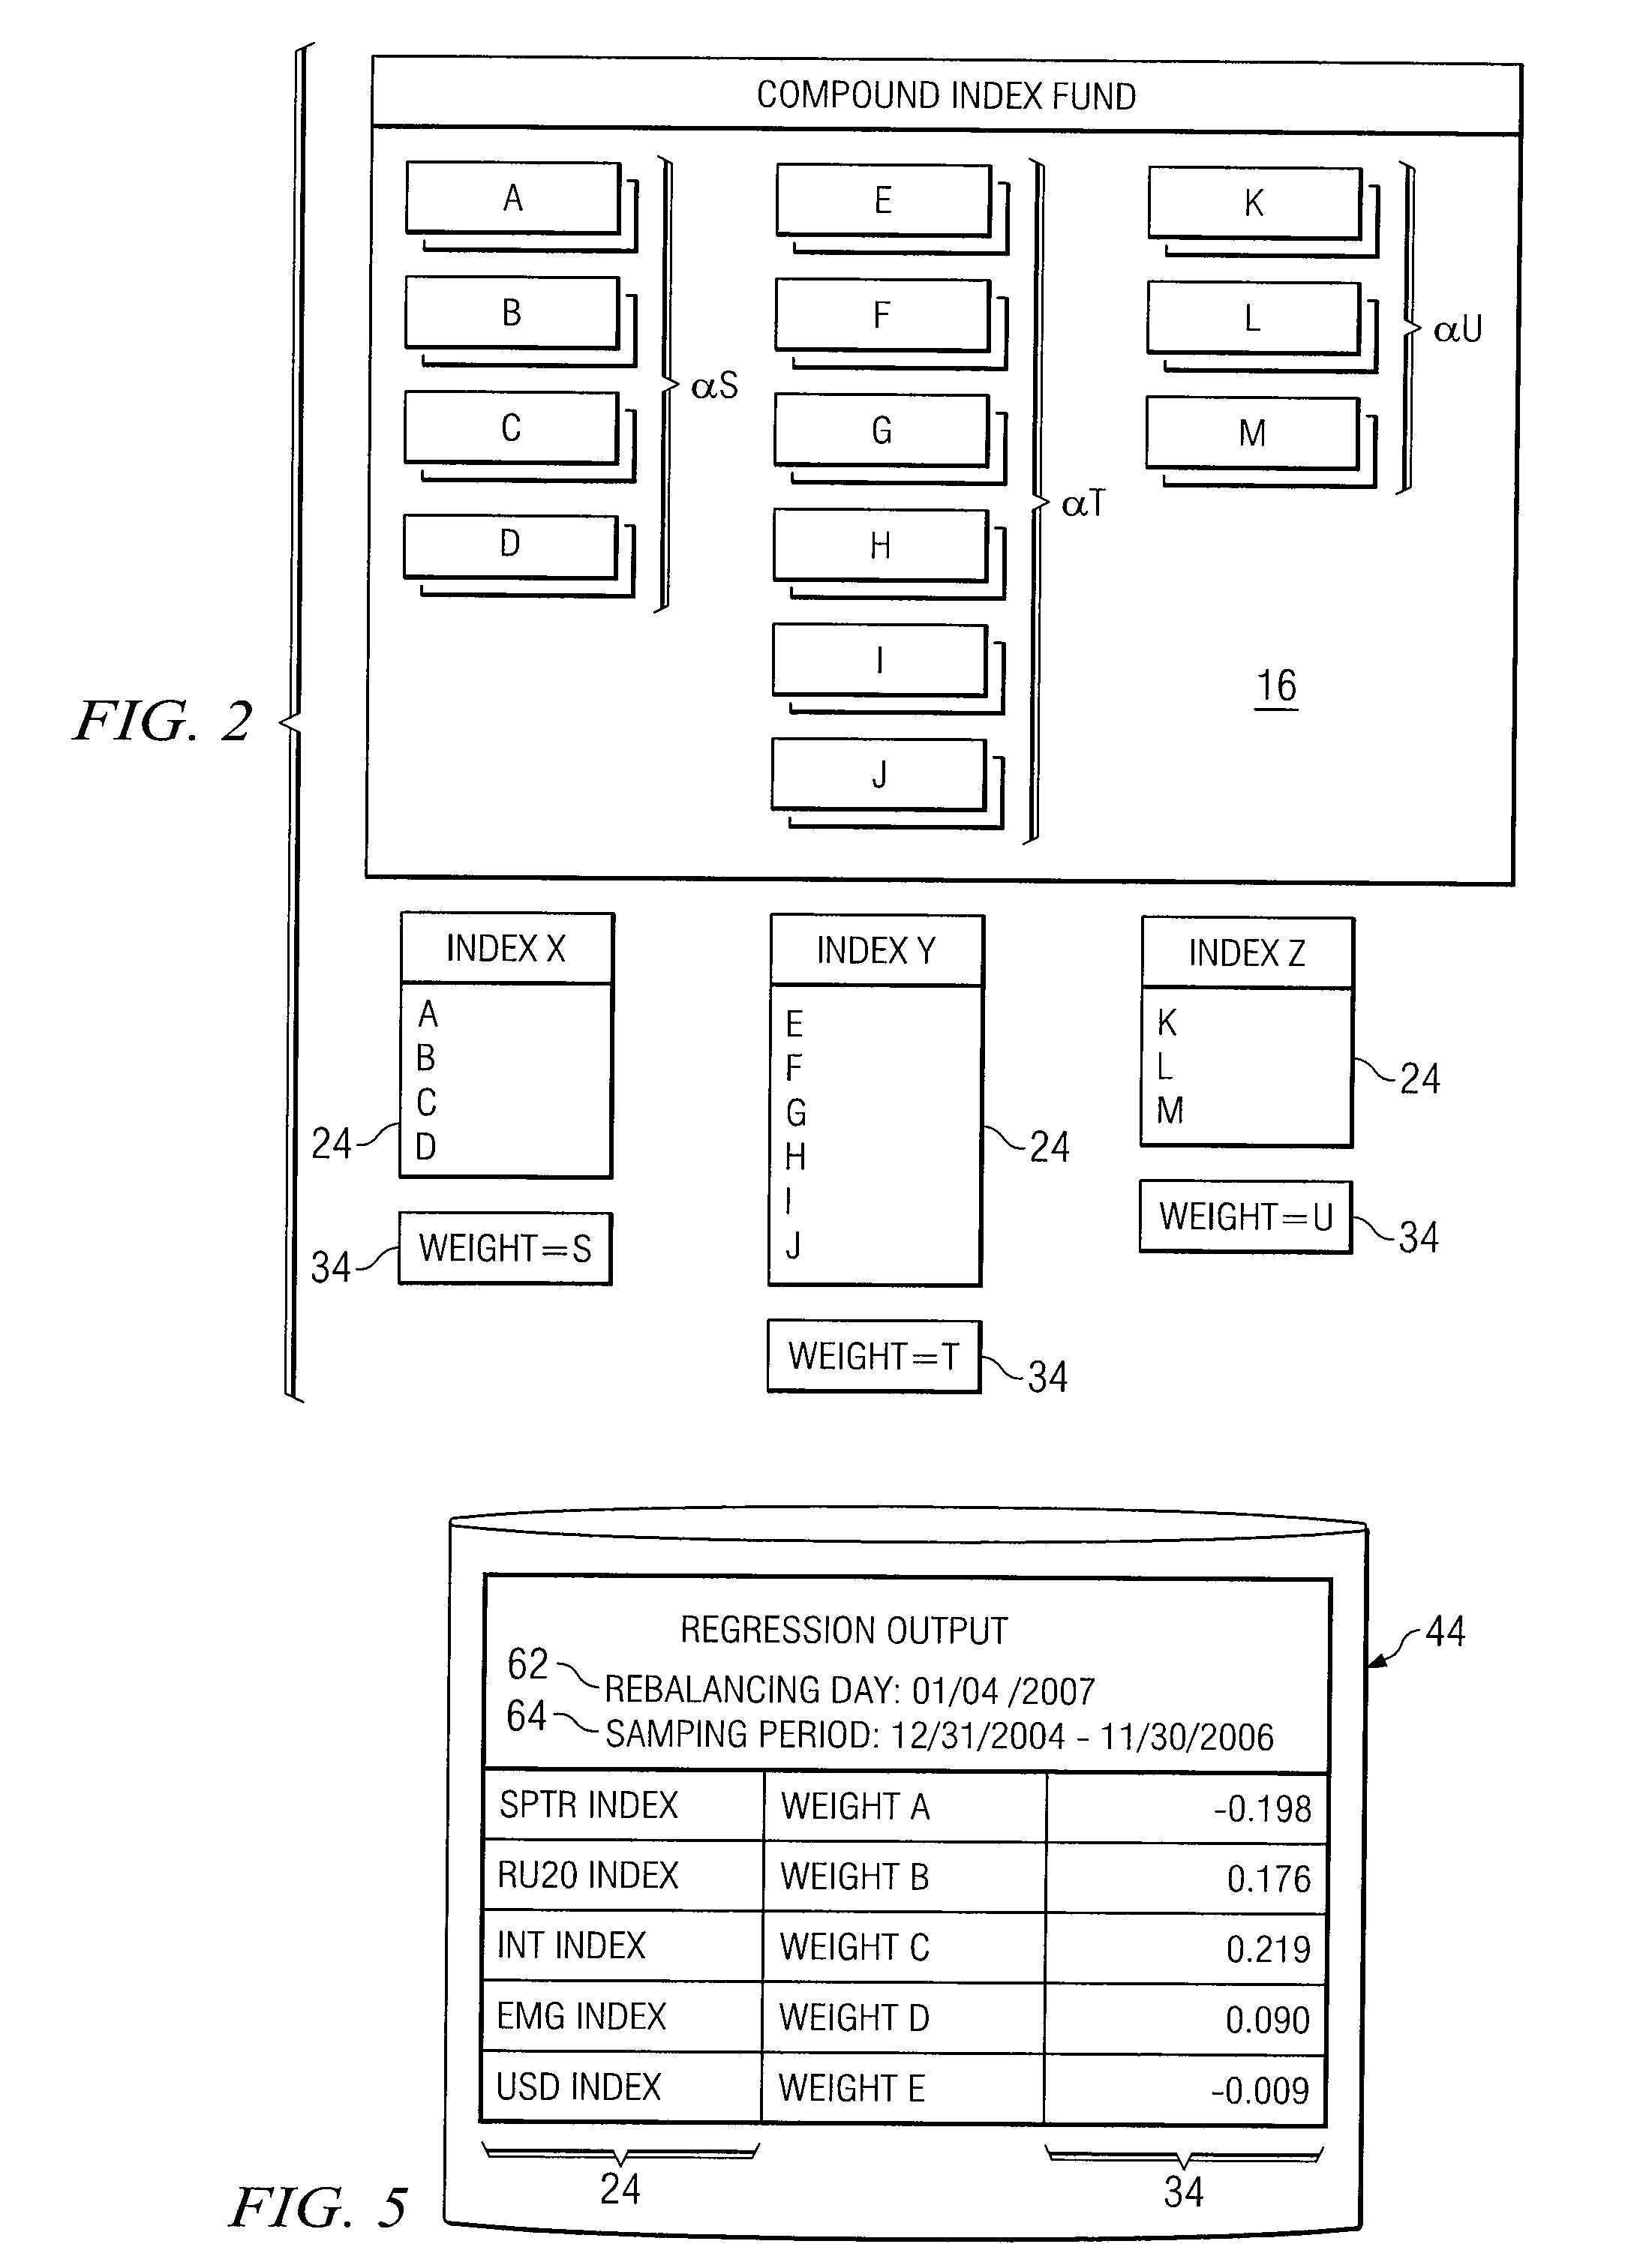 System and Method for Emulating a Long/Short Hedge Fund Index in a Trading System